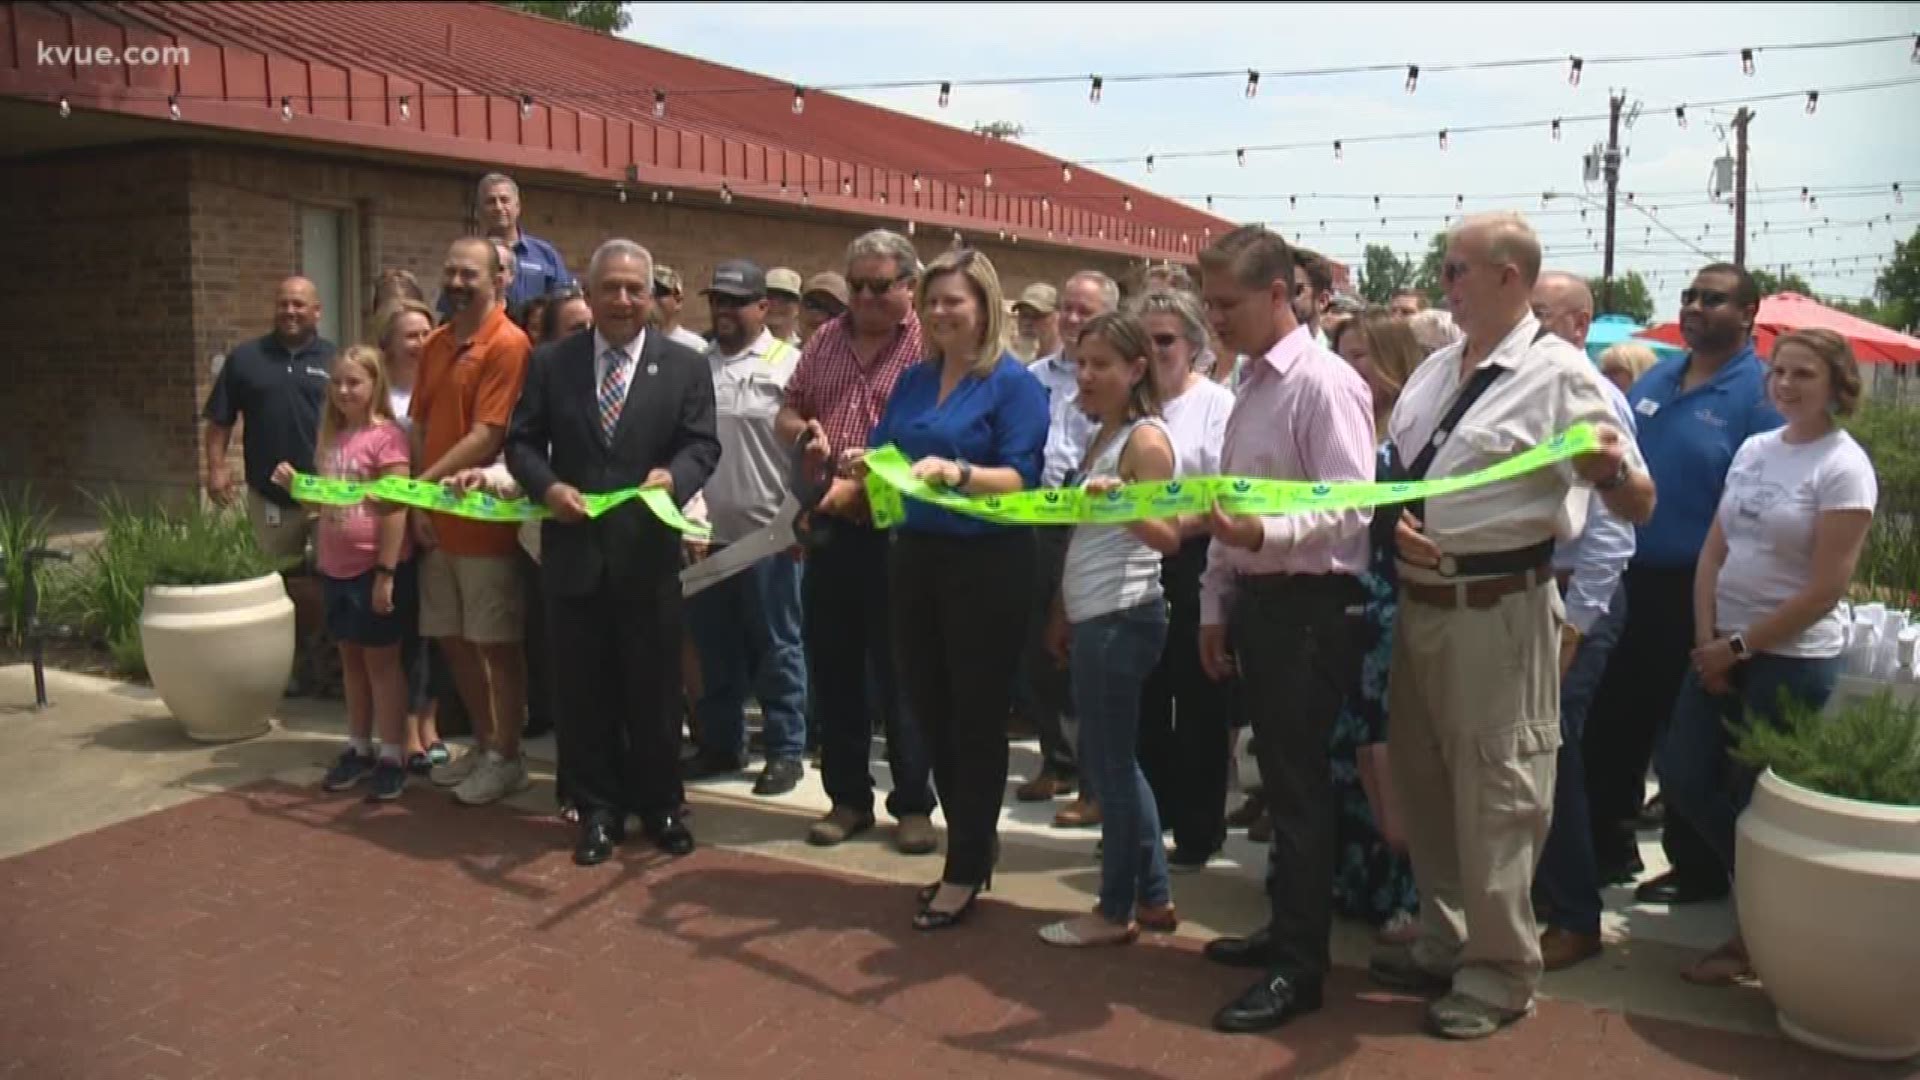 The city of Pflugerville is growing, as evidenced by its new Downtown Plaza unveiled on Monday.